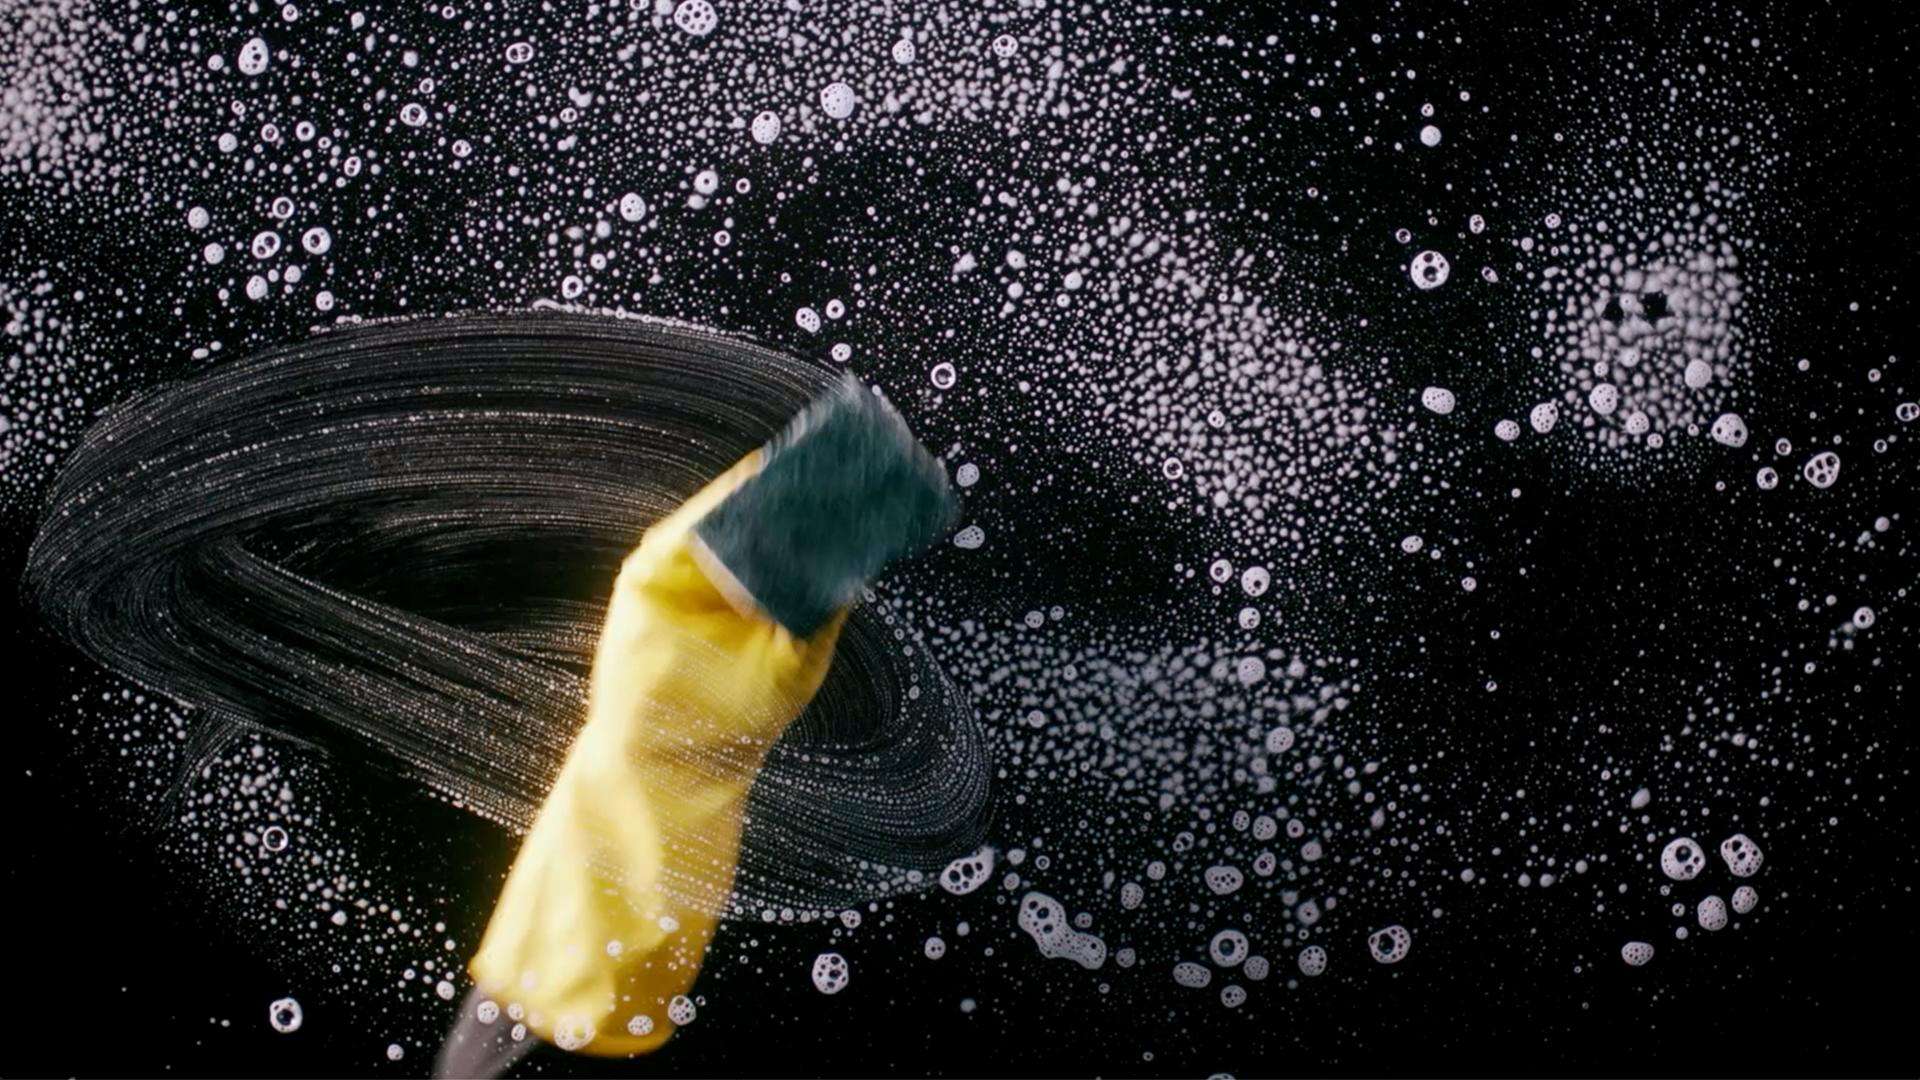 View from below, showing a hand with a glove cleaning the cooktop with a sponge